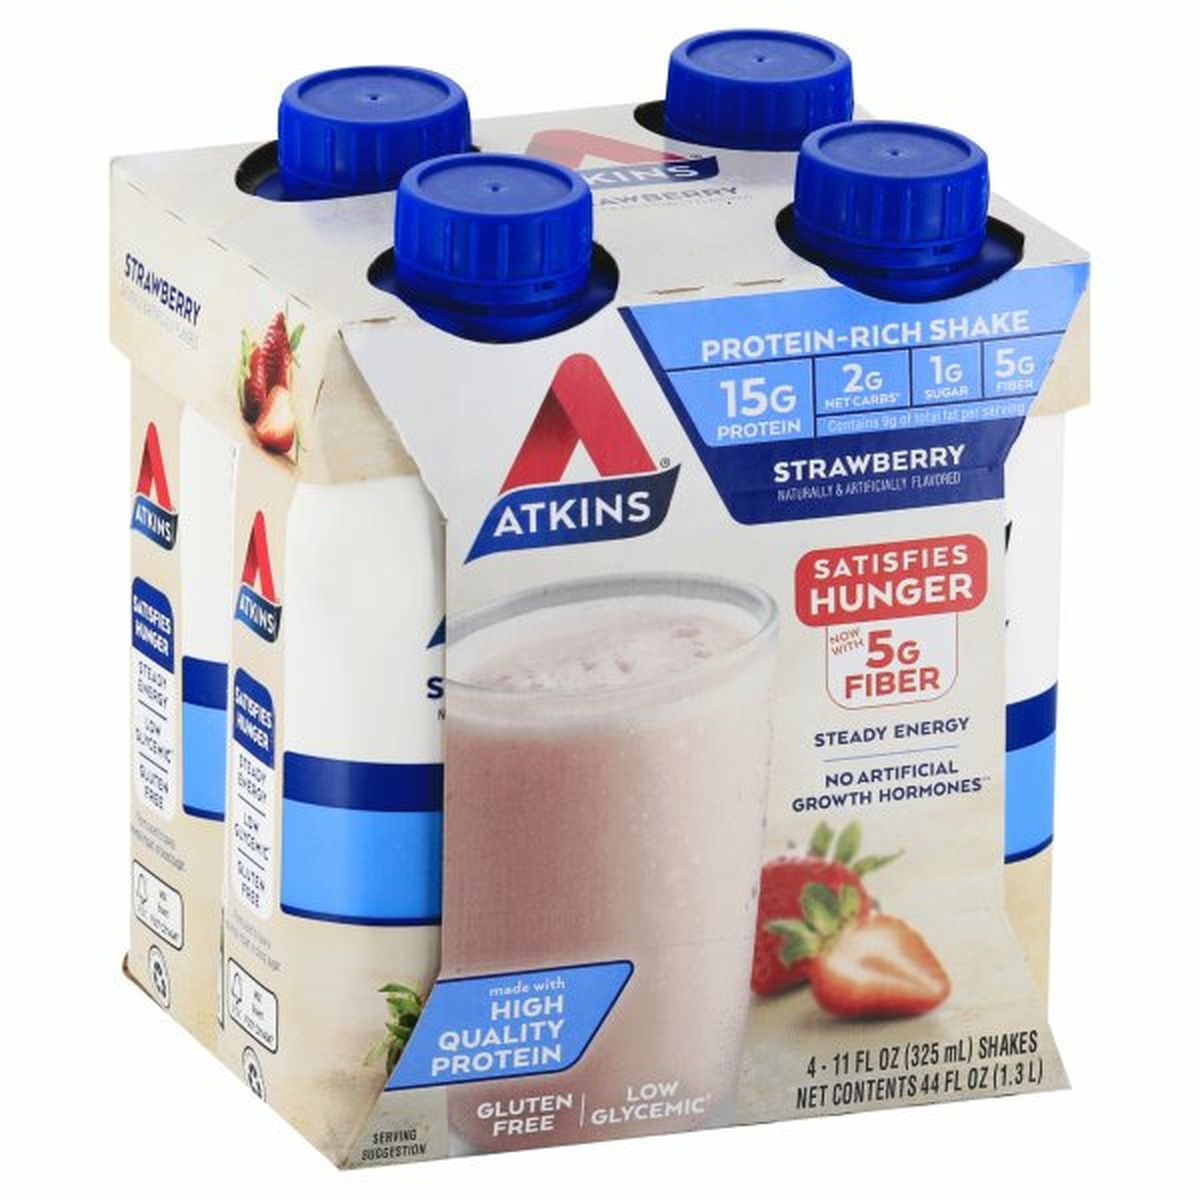 Calories in Atkins Protein-Rich Shake, Strawberry